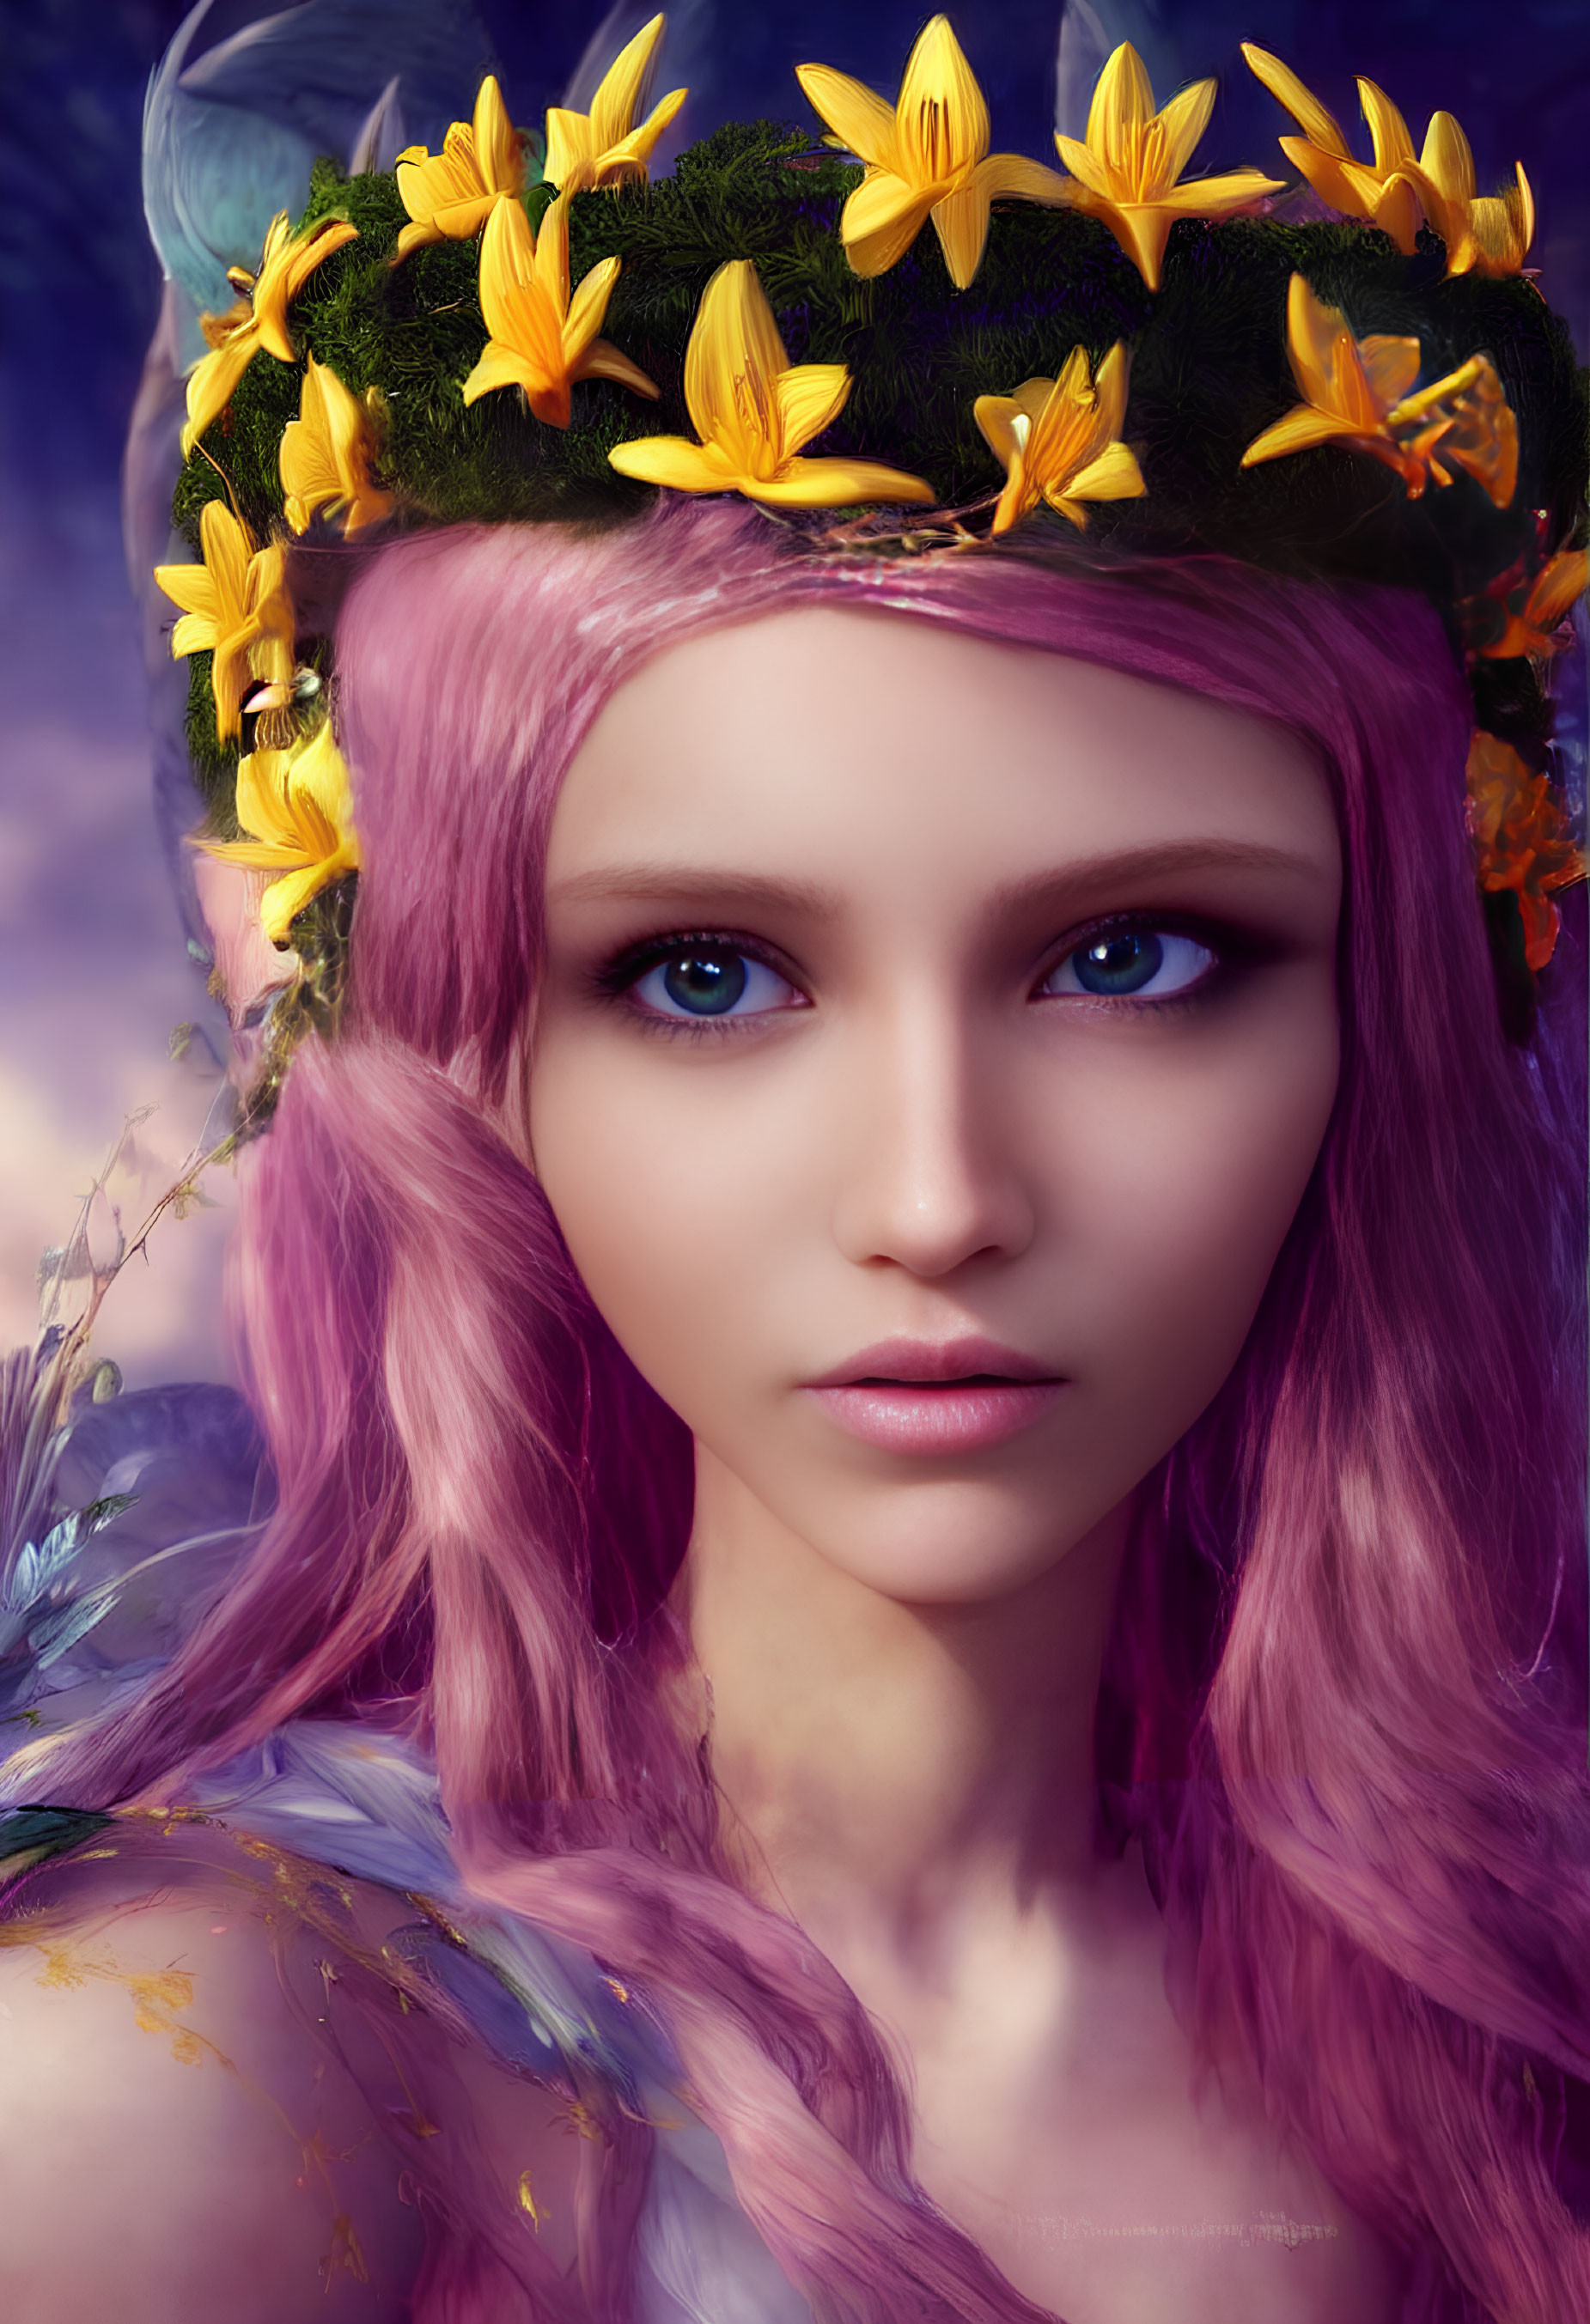 Digital artwork featuring person with pink hair, yellow flower wreath, blue eyes, purple backdrop